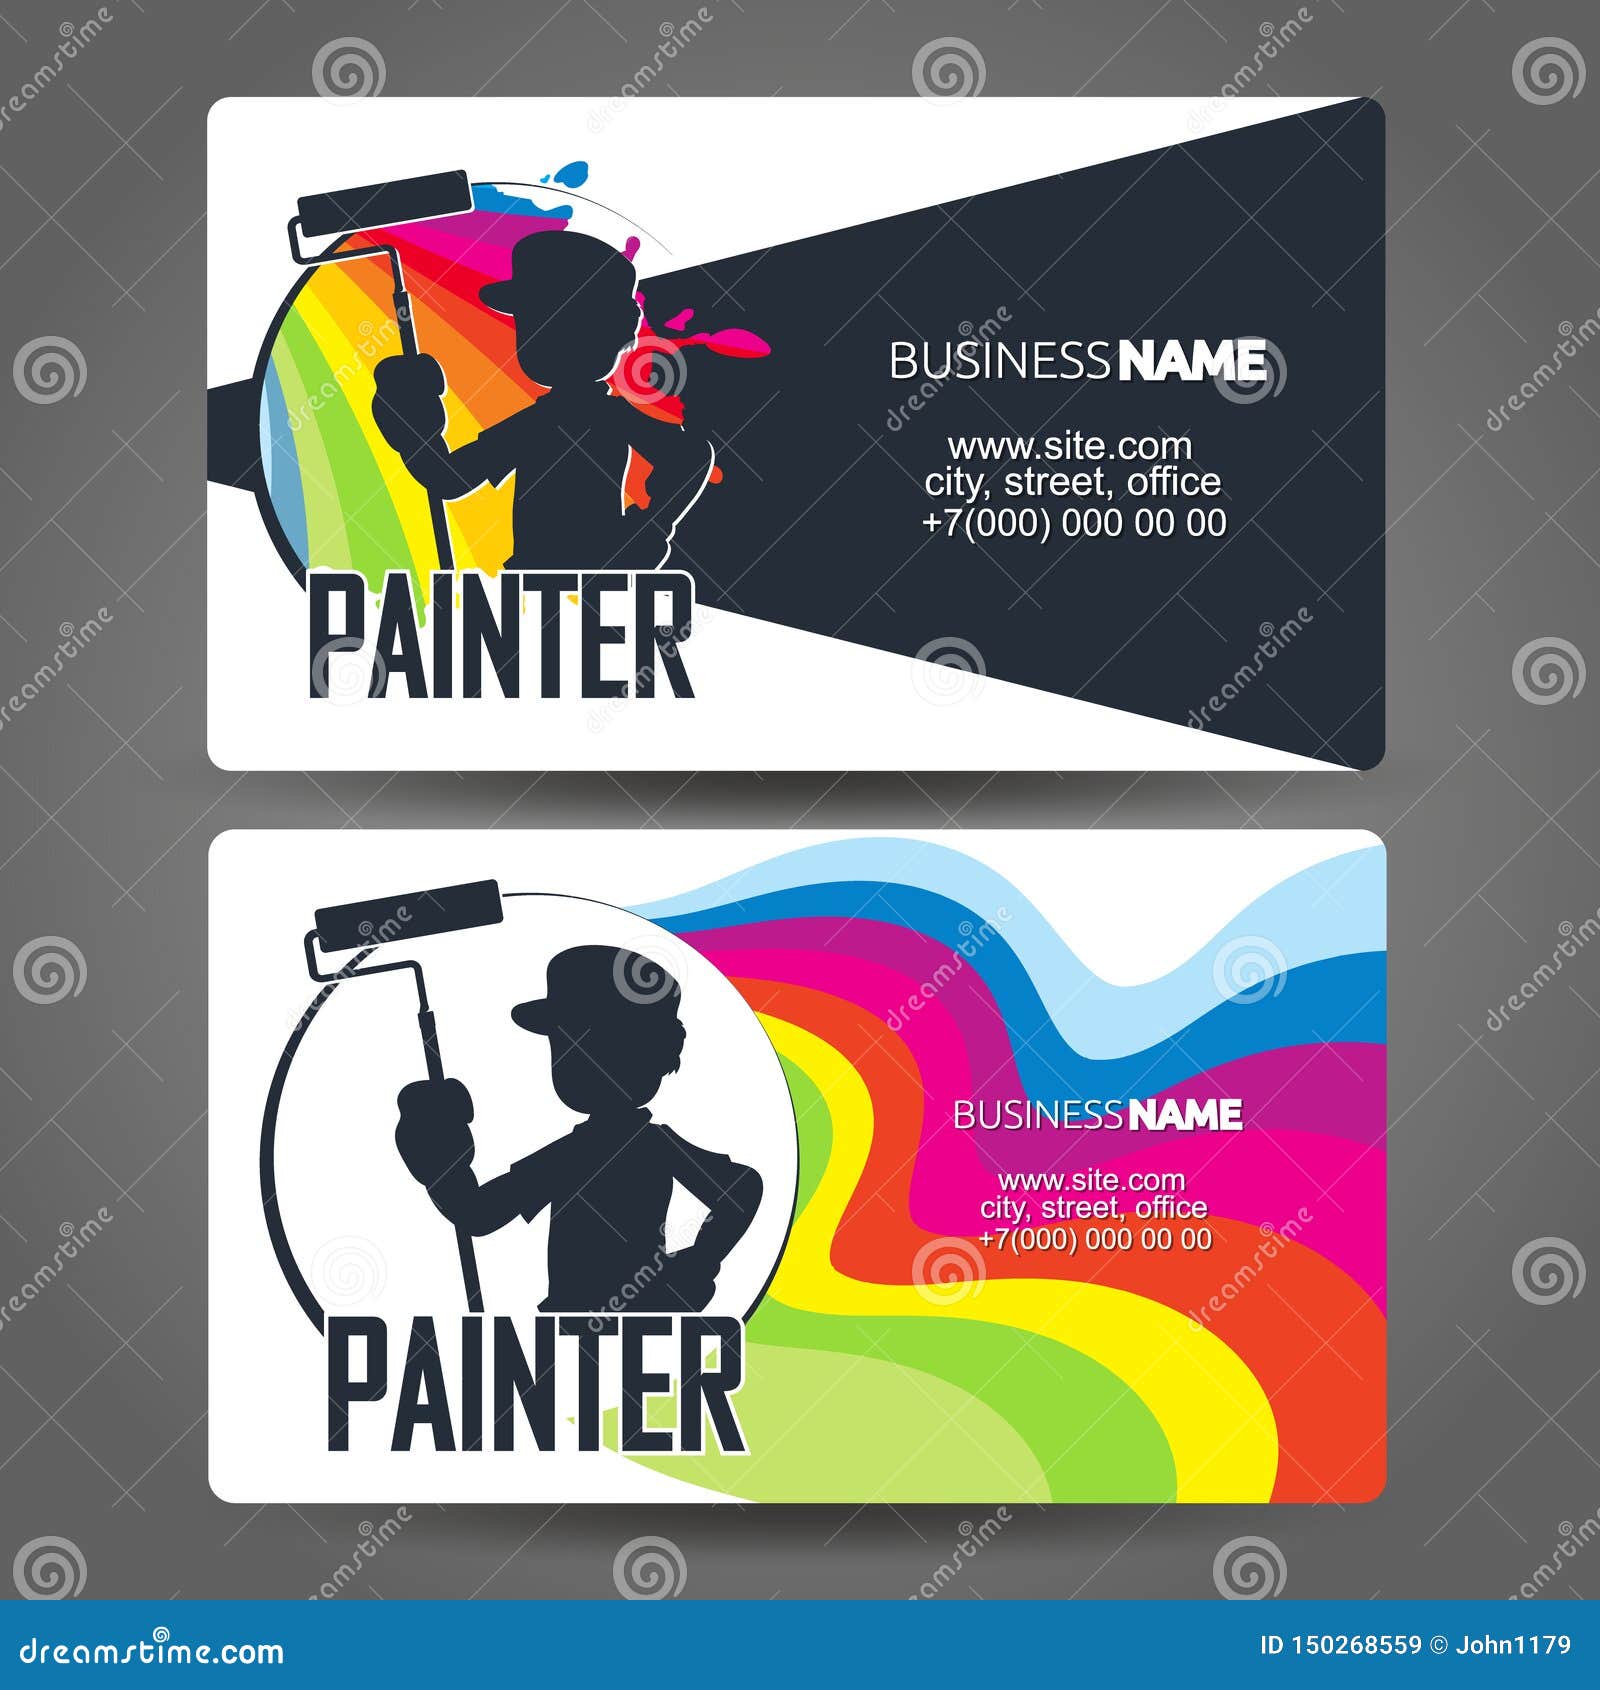 House Painter Business Card Concept Stock Vector